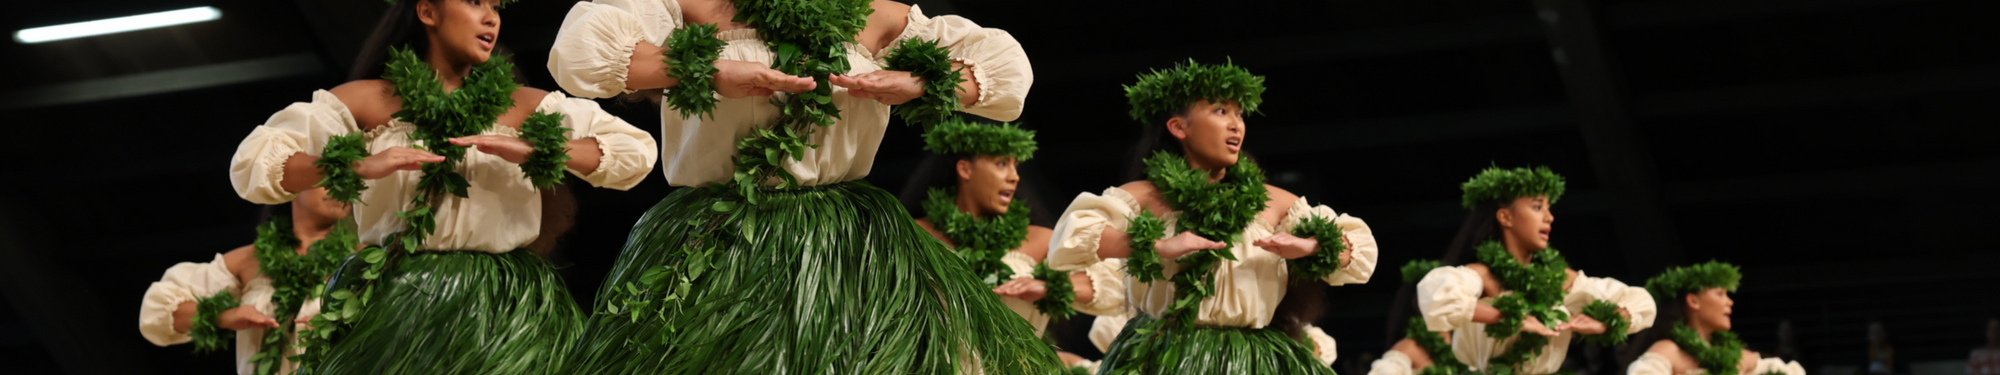 Makers at Merrie Monarch